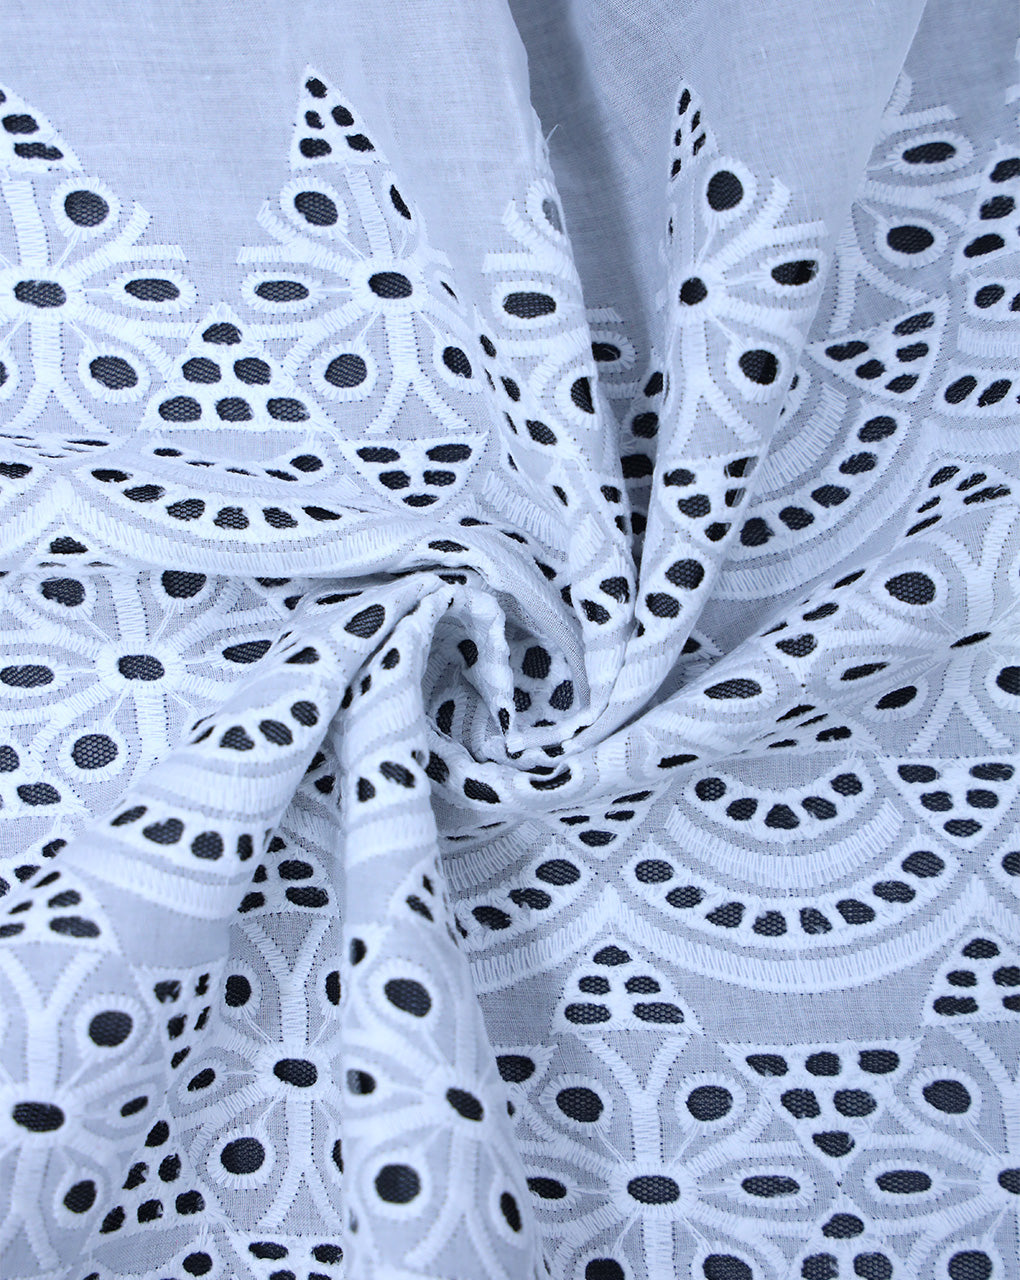 WHITE COTTON SCHIFFLI EMBROIDERY FABRIC (WIDTH: 42 INCHES)